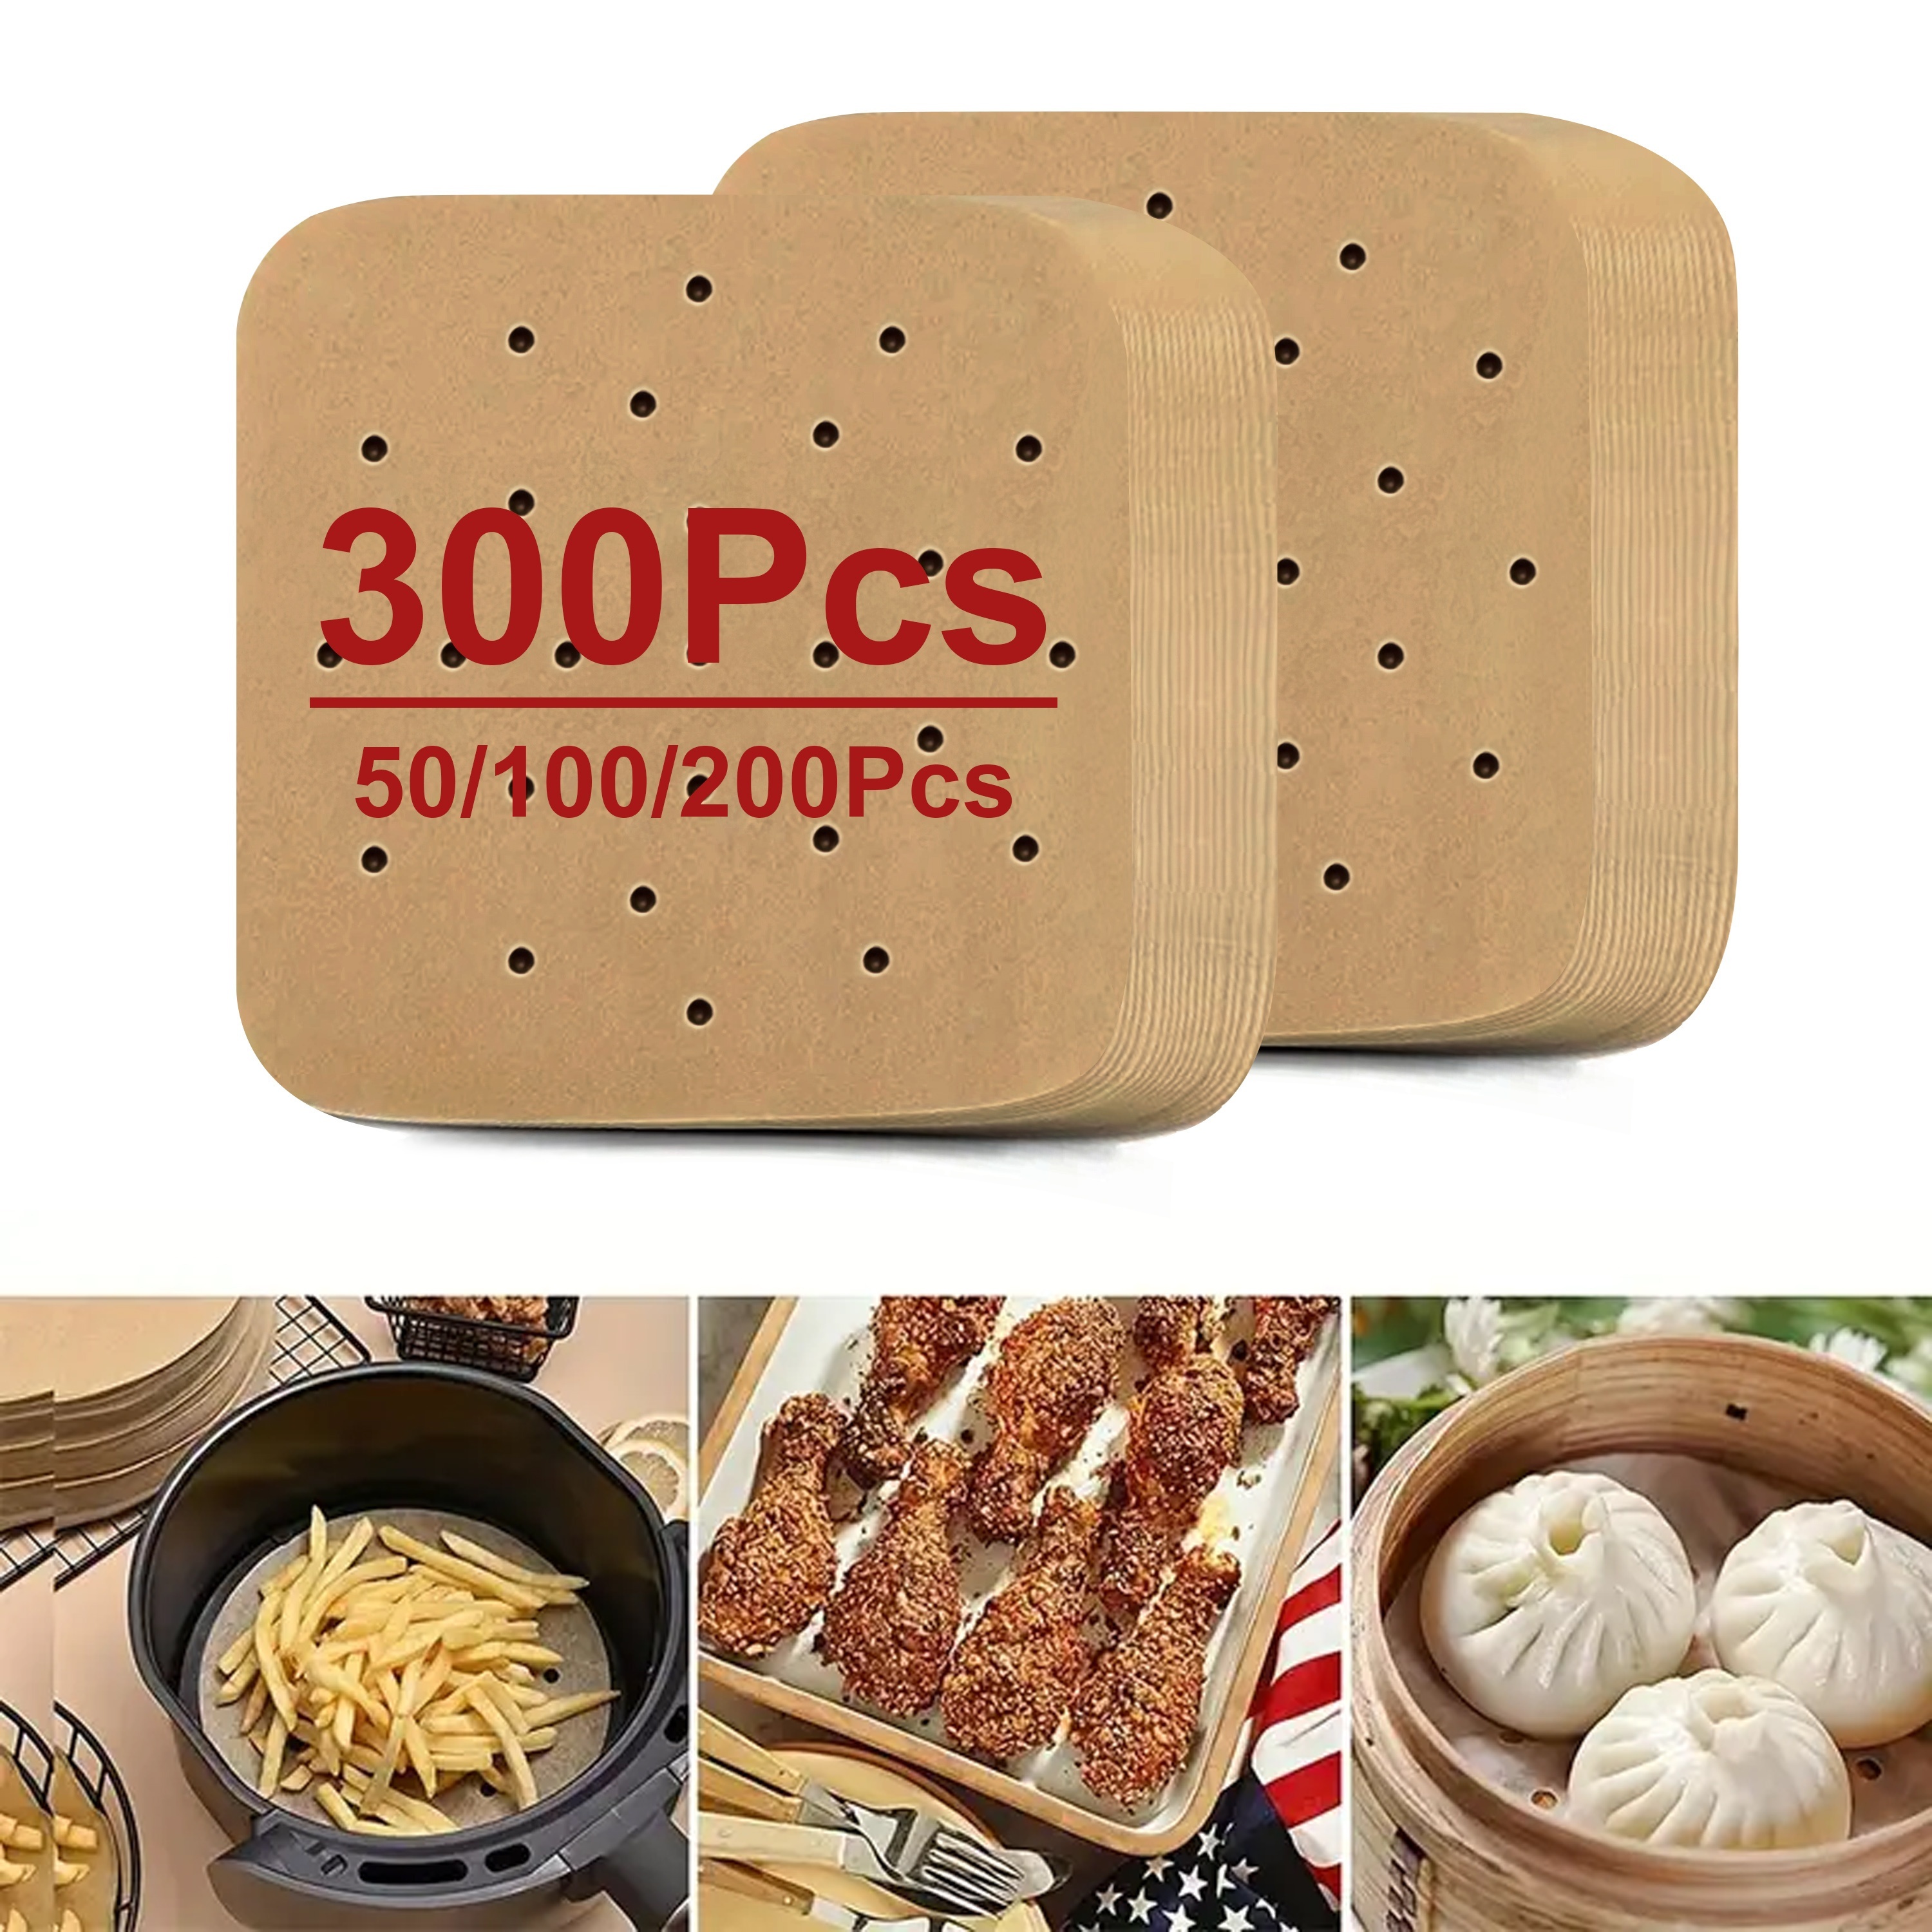 100 Pack Round Air Fryer Liners with Holes for Air Fryer Basket, Dumpling  Paper, 8-Inch Perforated Bamboo Steamer Liner Sheets for Air Frying,  Steaming, and Baking (White) 